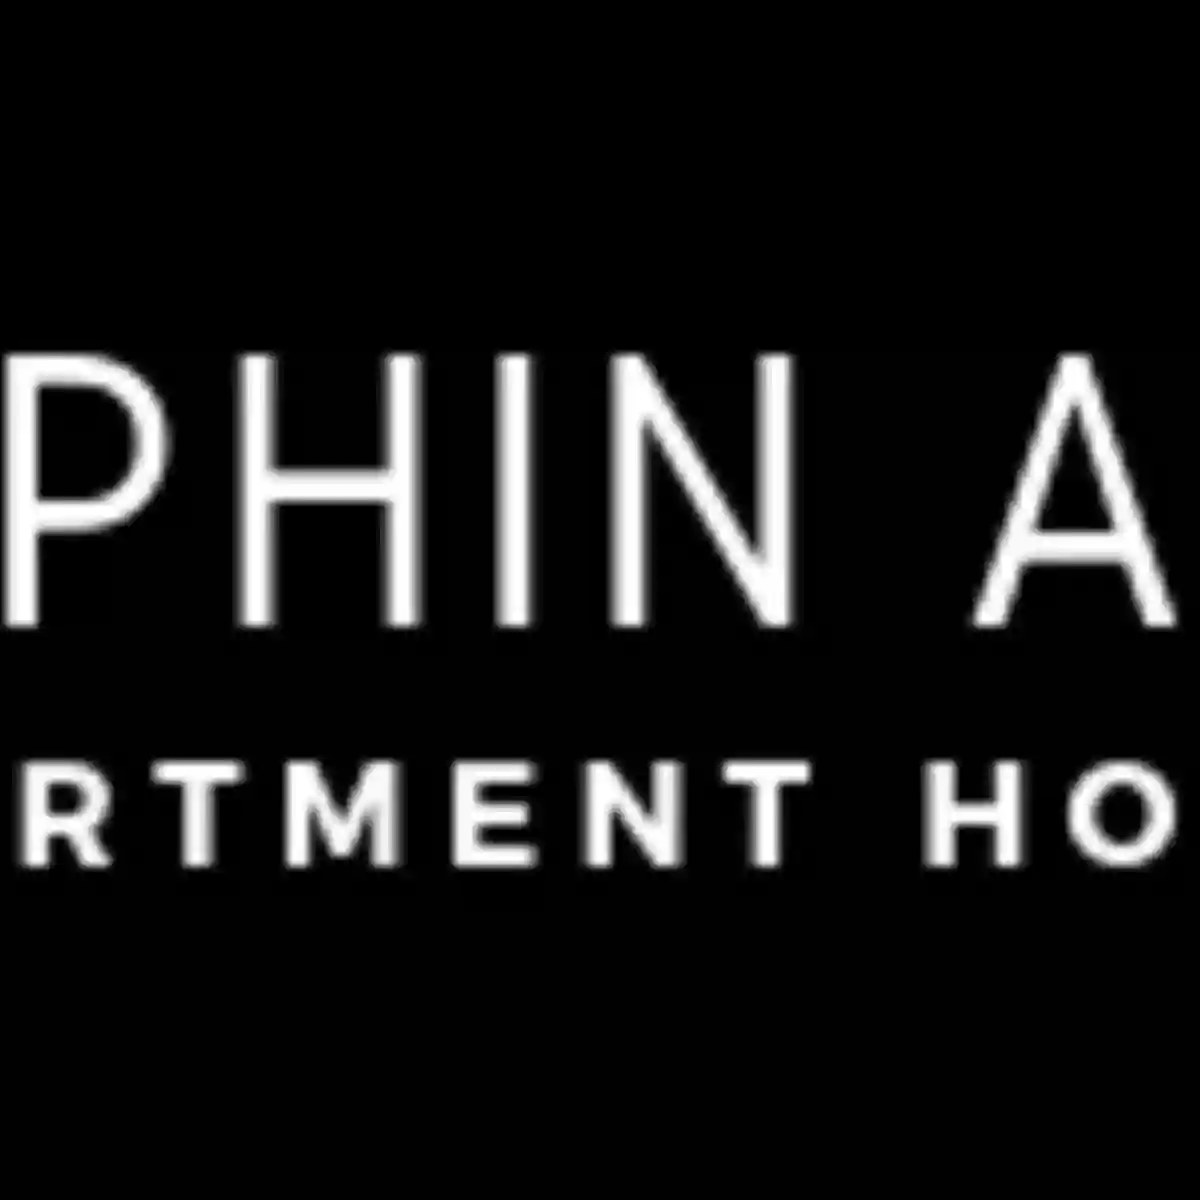 Dauphin Arms Apartment Homes